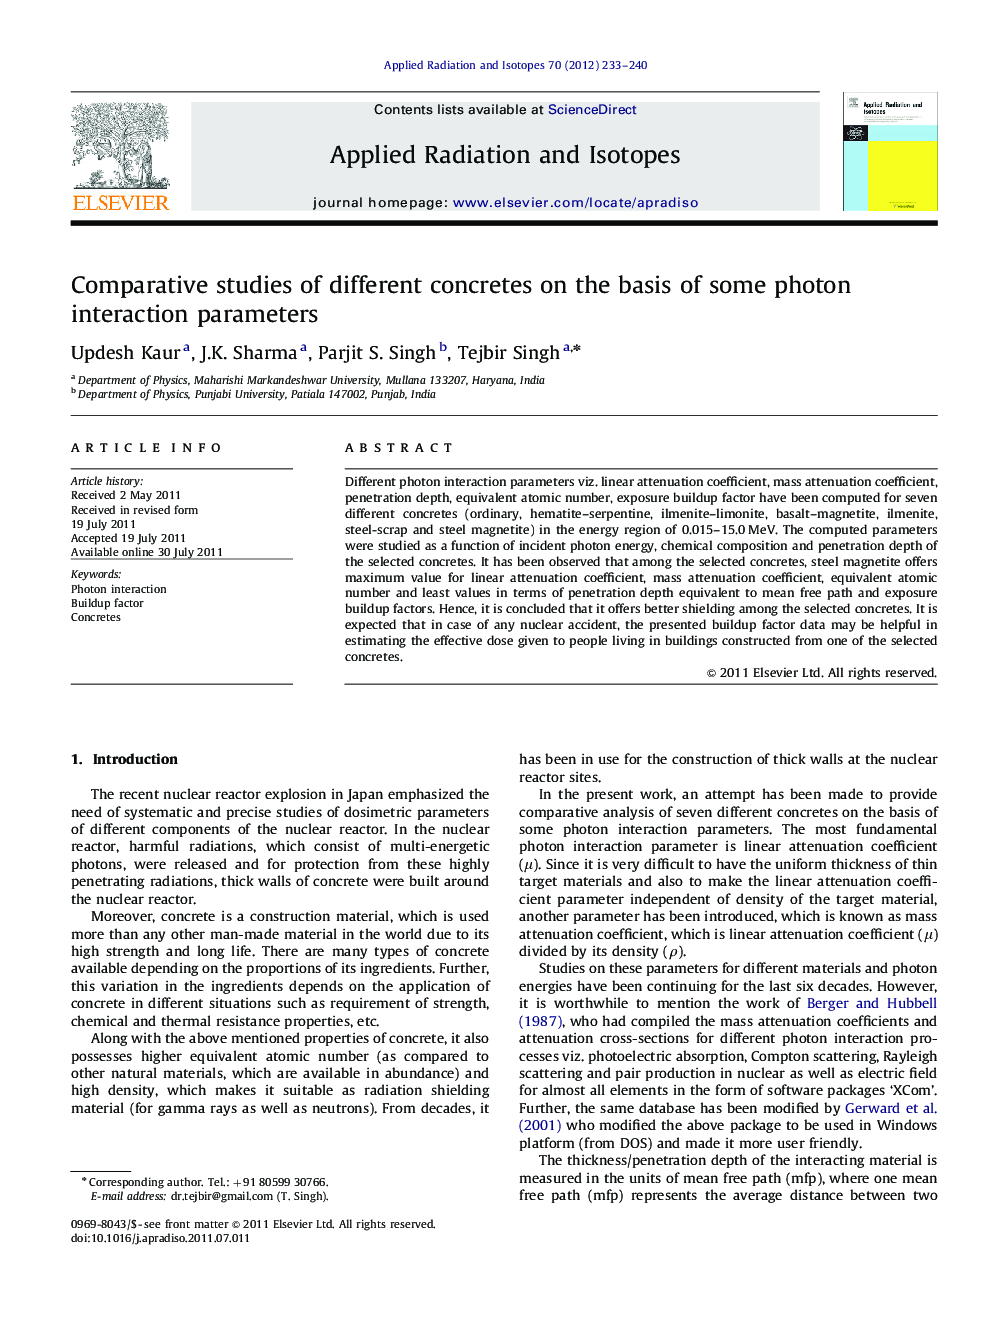 Comparative studies of different concretes on the basis of some photon interaction parameters